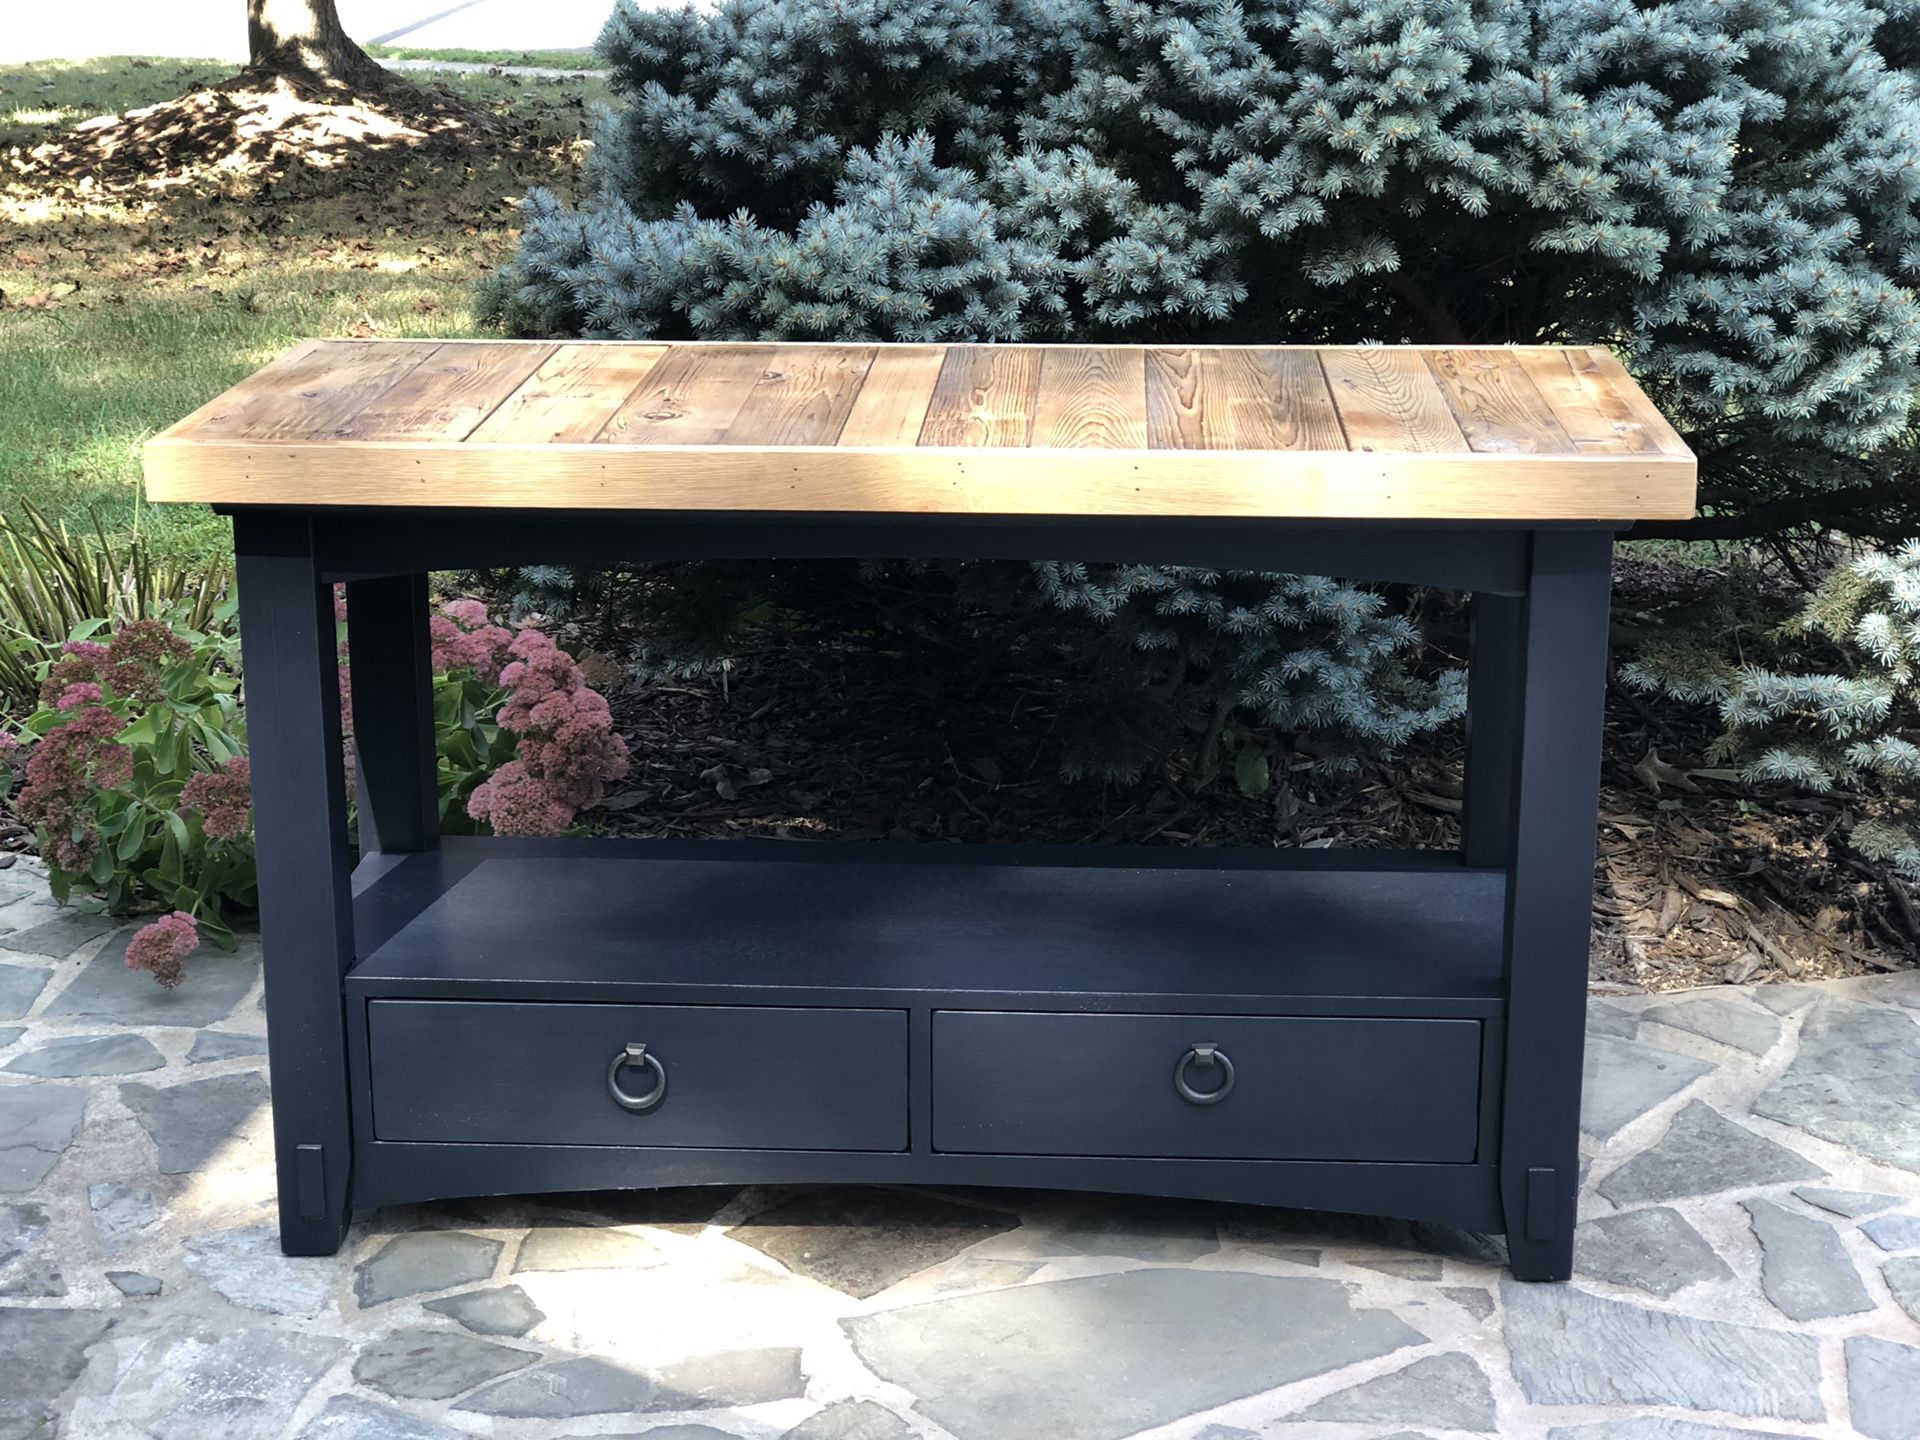 Gorgeous milk painted navy/black console table with reclaimed wood custom made top